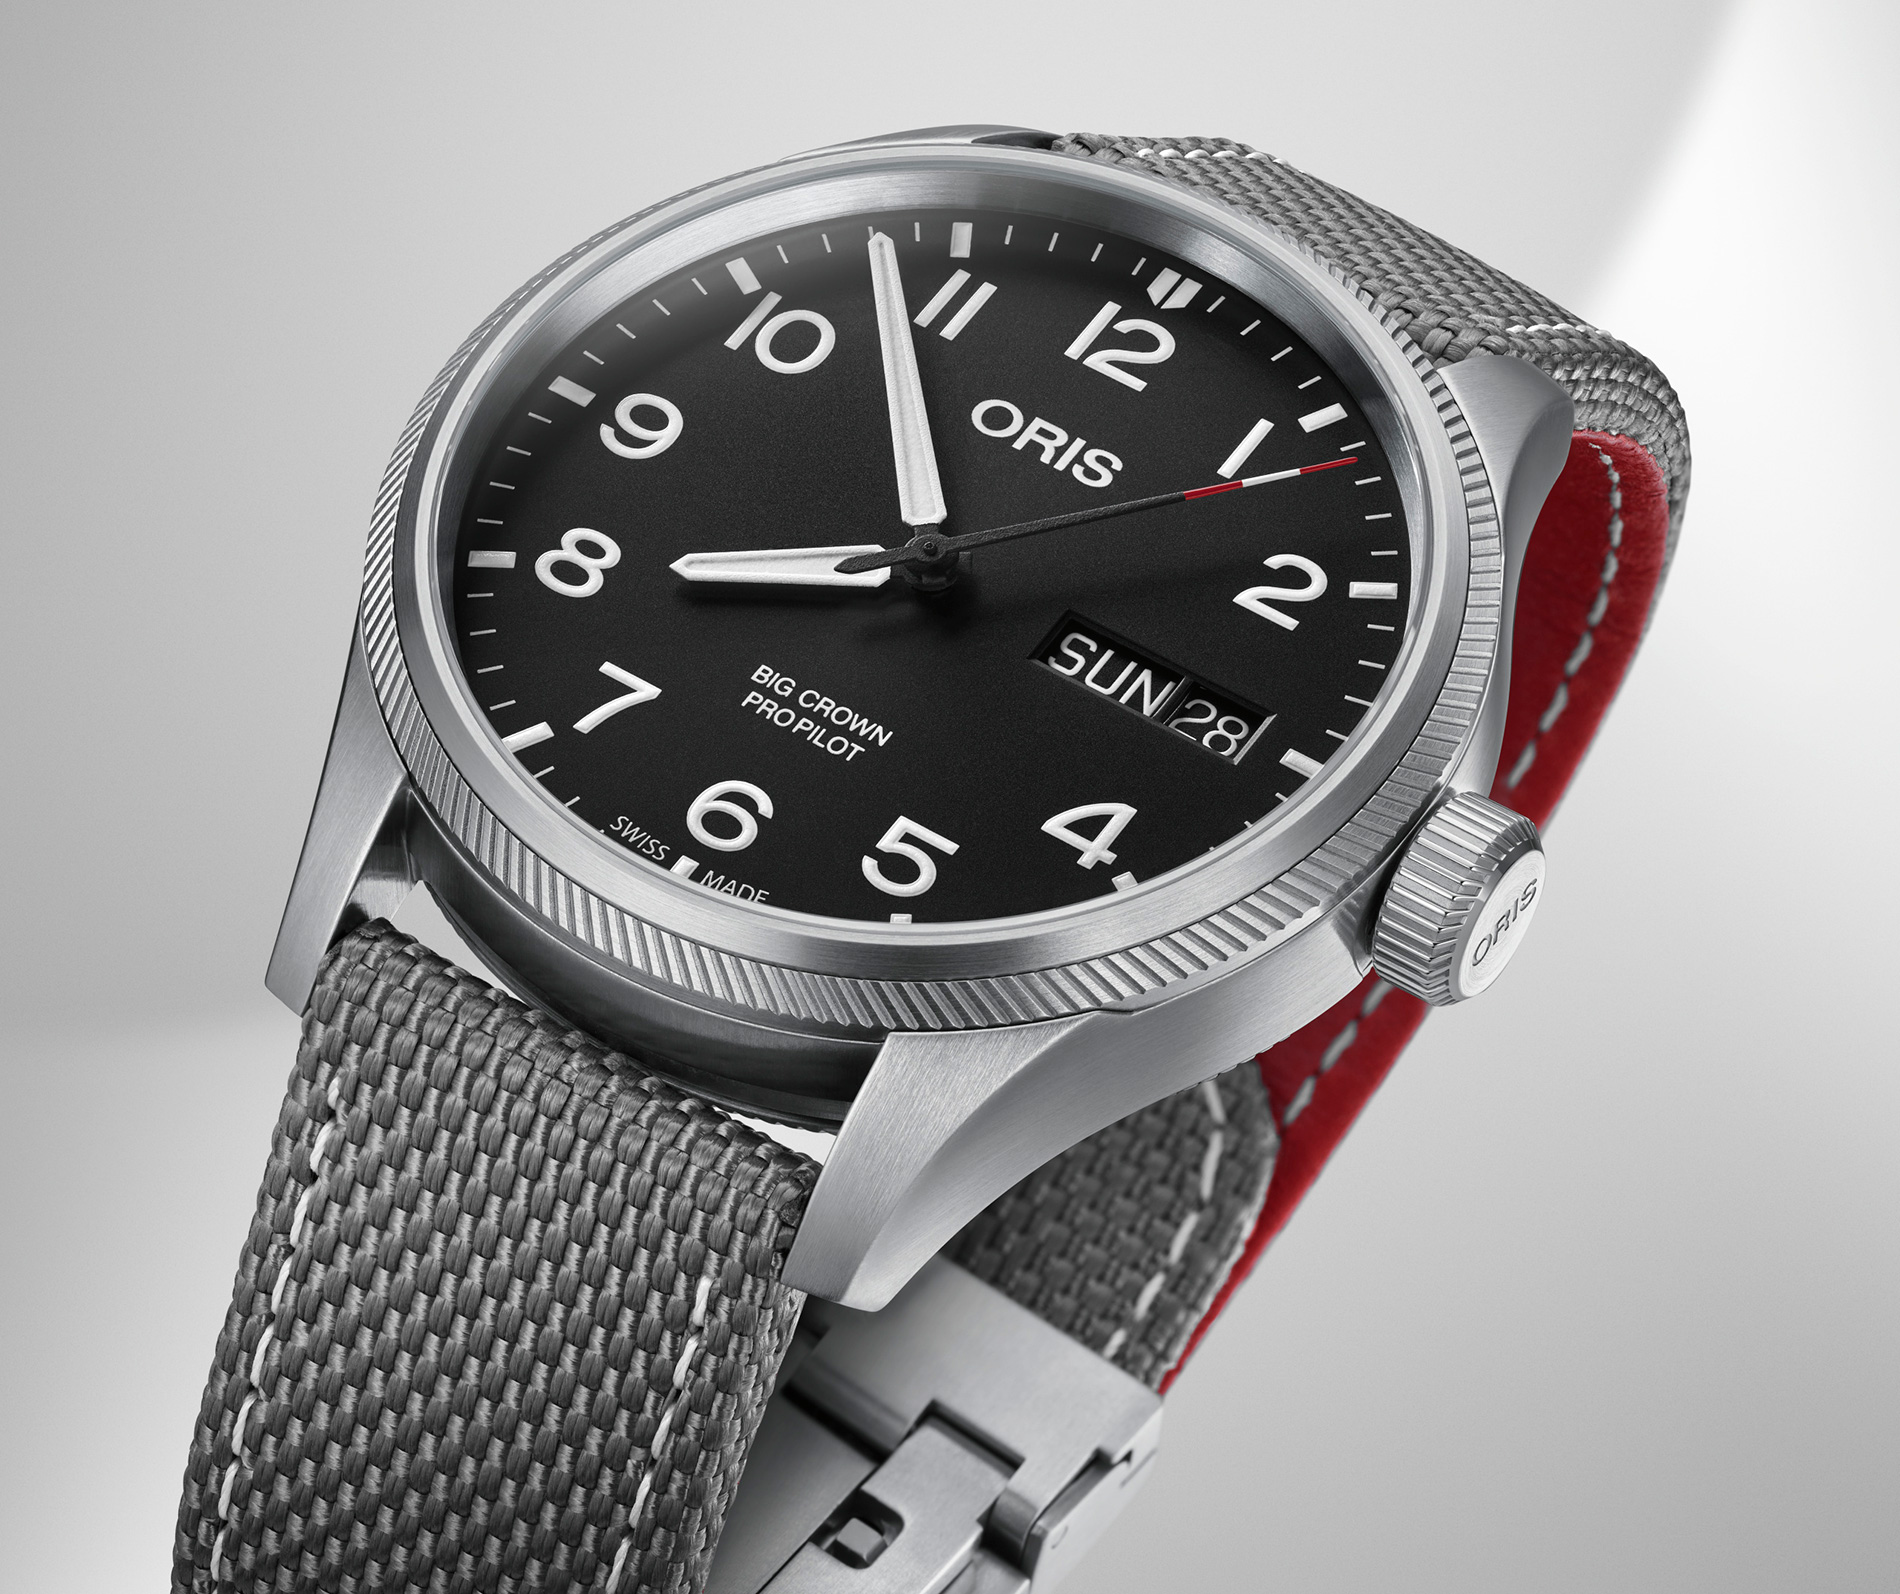 01-752-7698-4194-Set-TS---Oris-55th-Reno-Air-Races-Limited-Edition_HighRes_9176